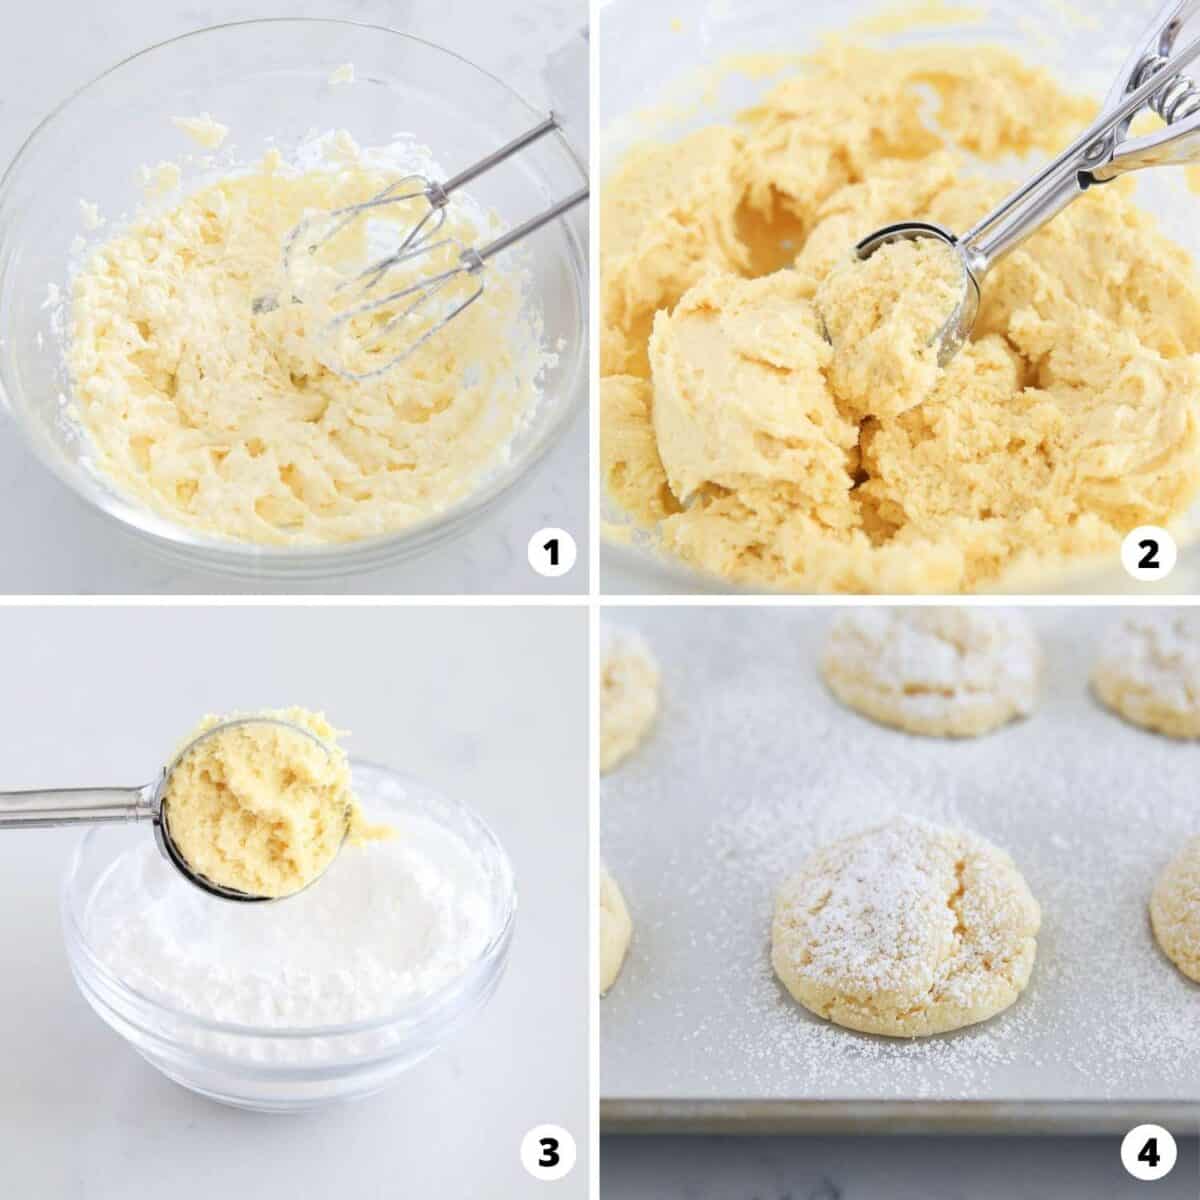 Showing how to make gooey butter cookies in a 4 step collage.